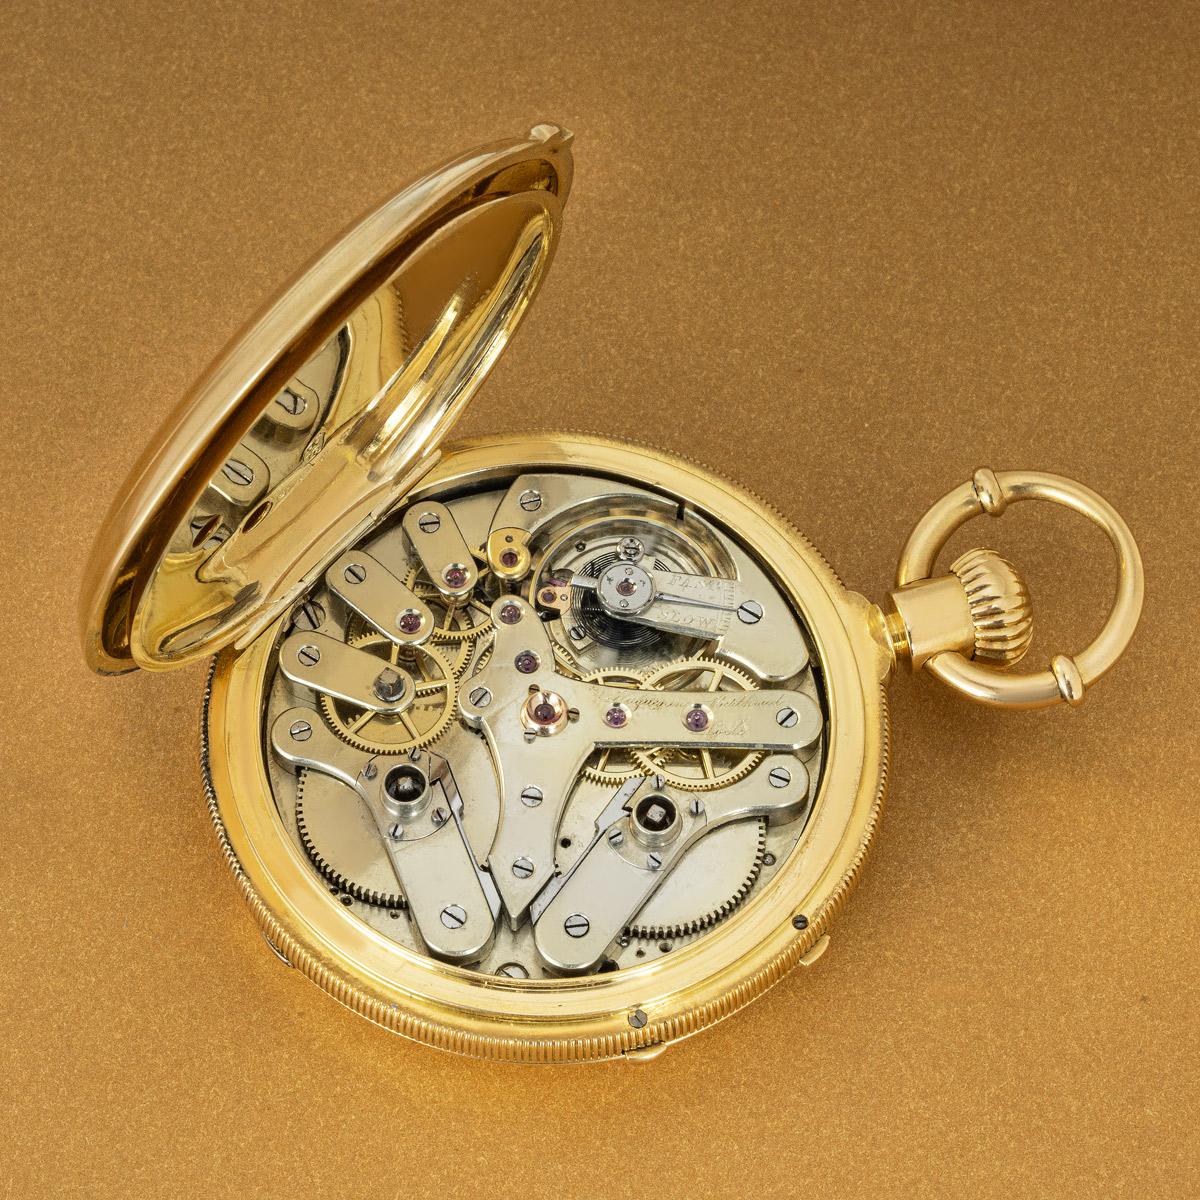 Huguenin Berthoud. A Rare Early Gold, Hunting Cased, Watch Chronograph C1860 For Sale 3